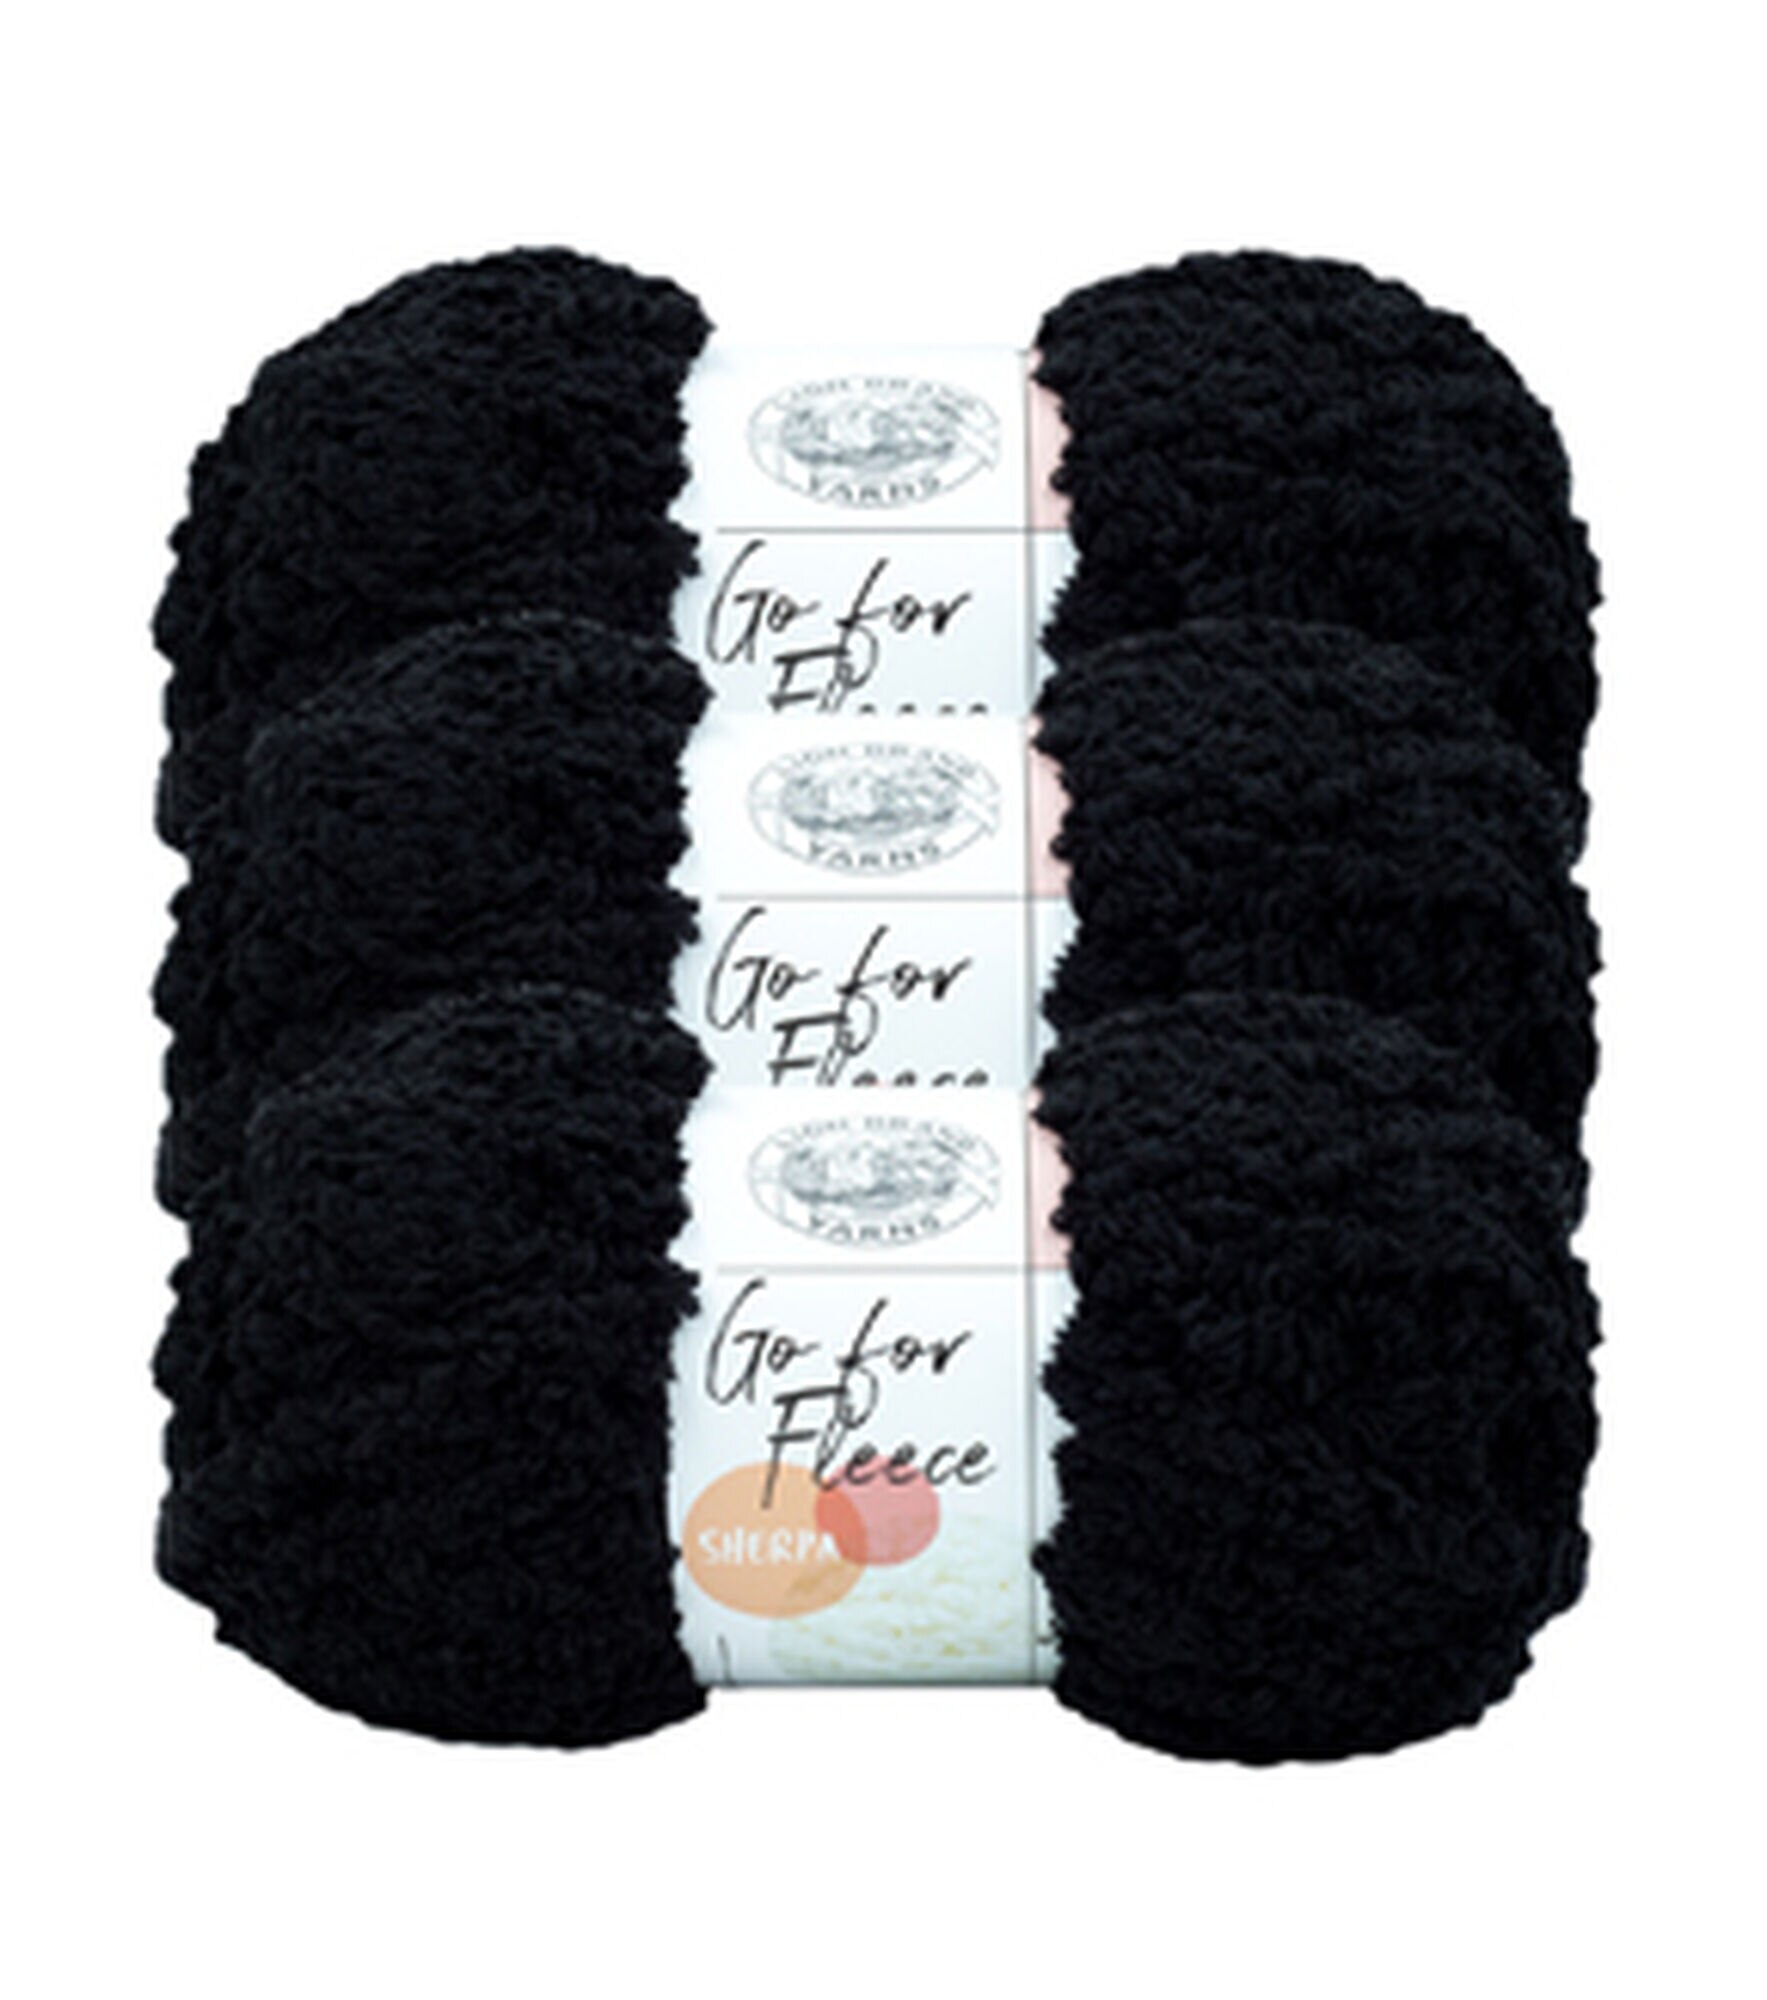 Lion Brand Go For Faux Yarn 3pk by Lion Brand